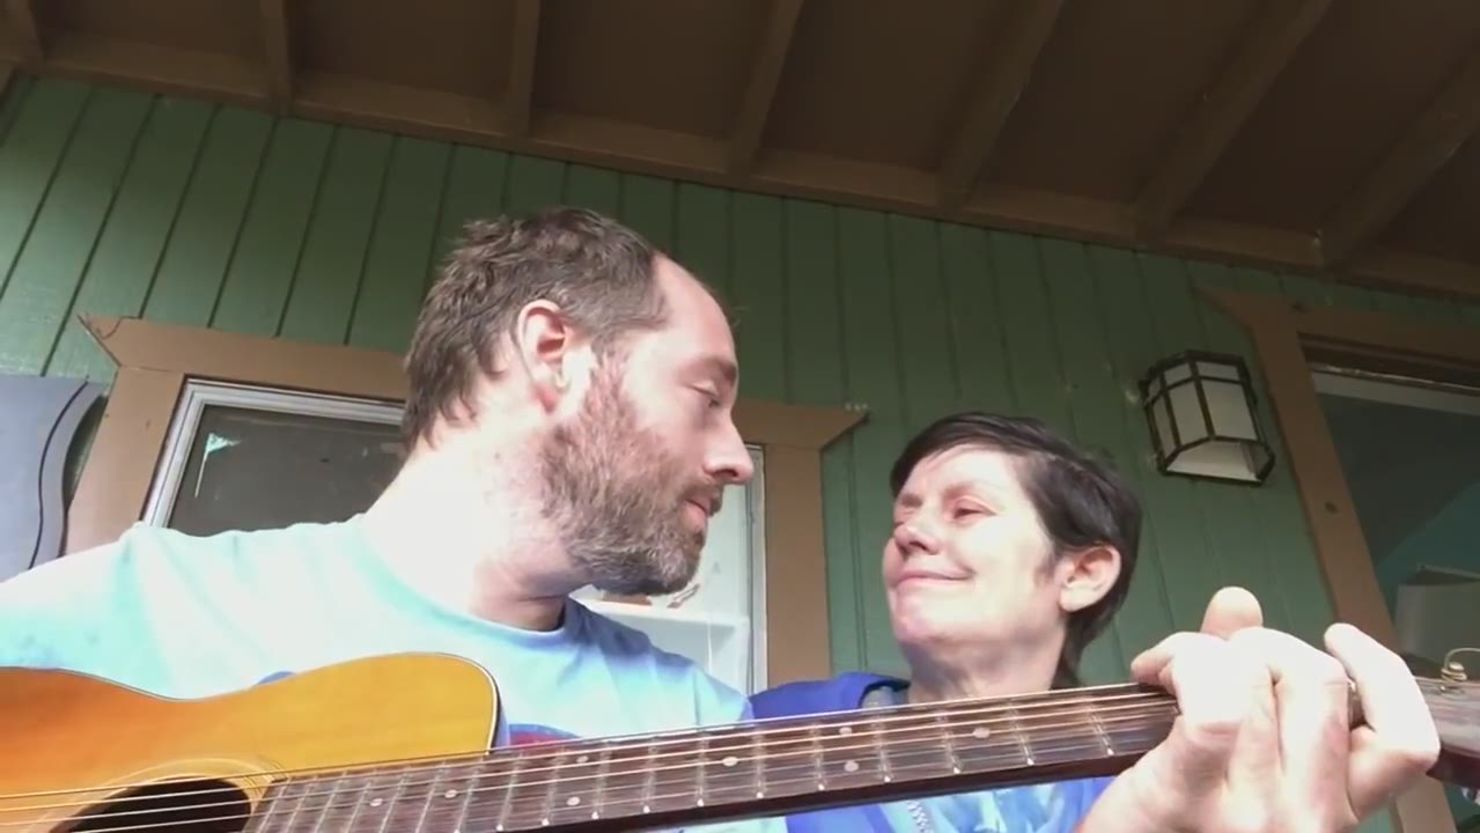 Joe Fraley posted a video on Reddit of him singing to his mother.